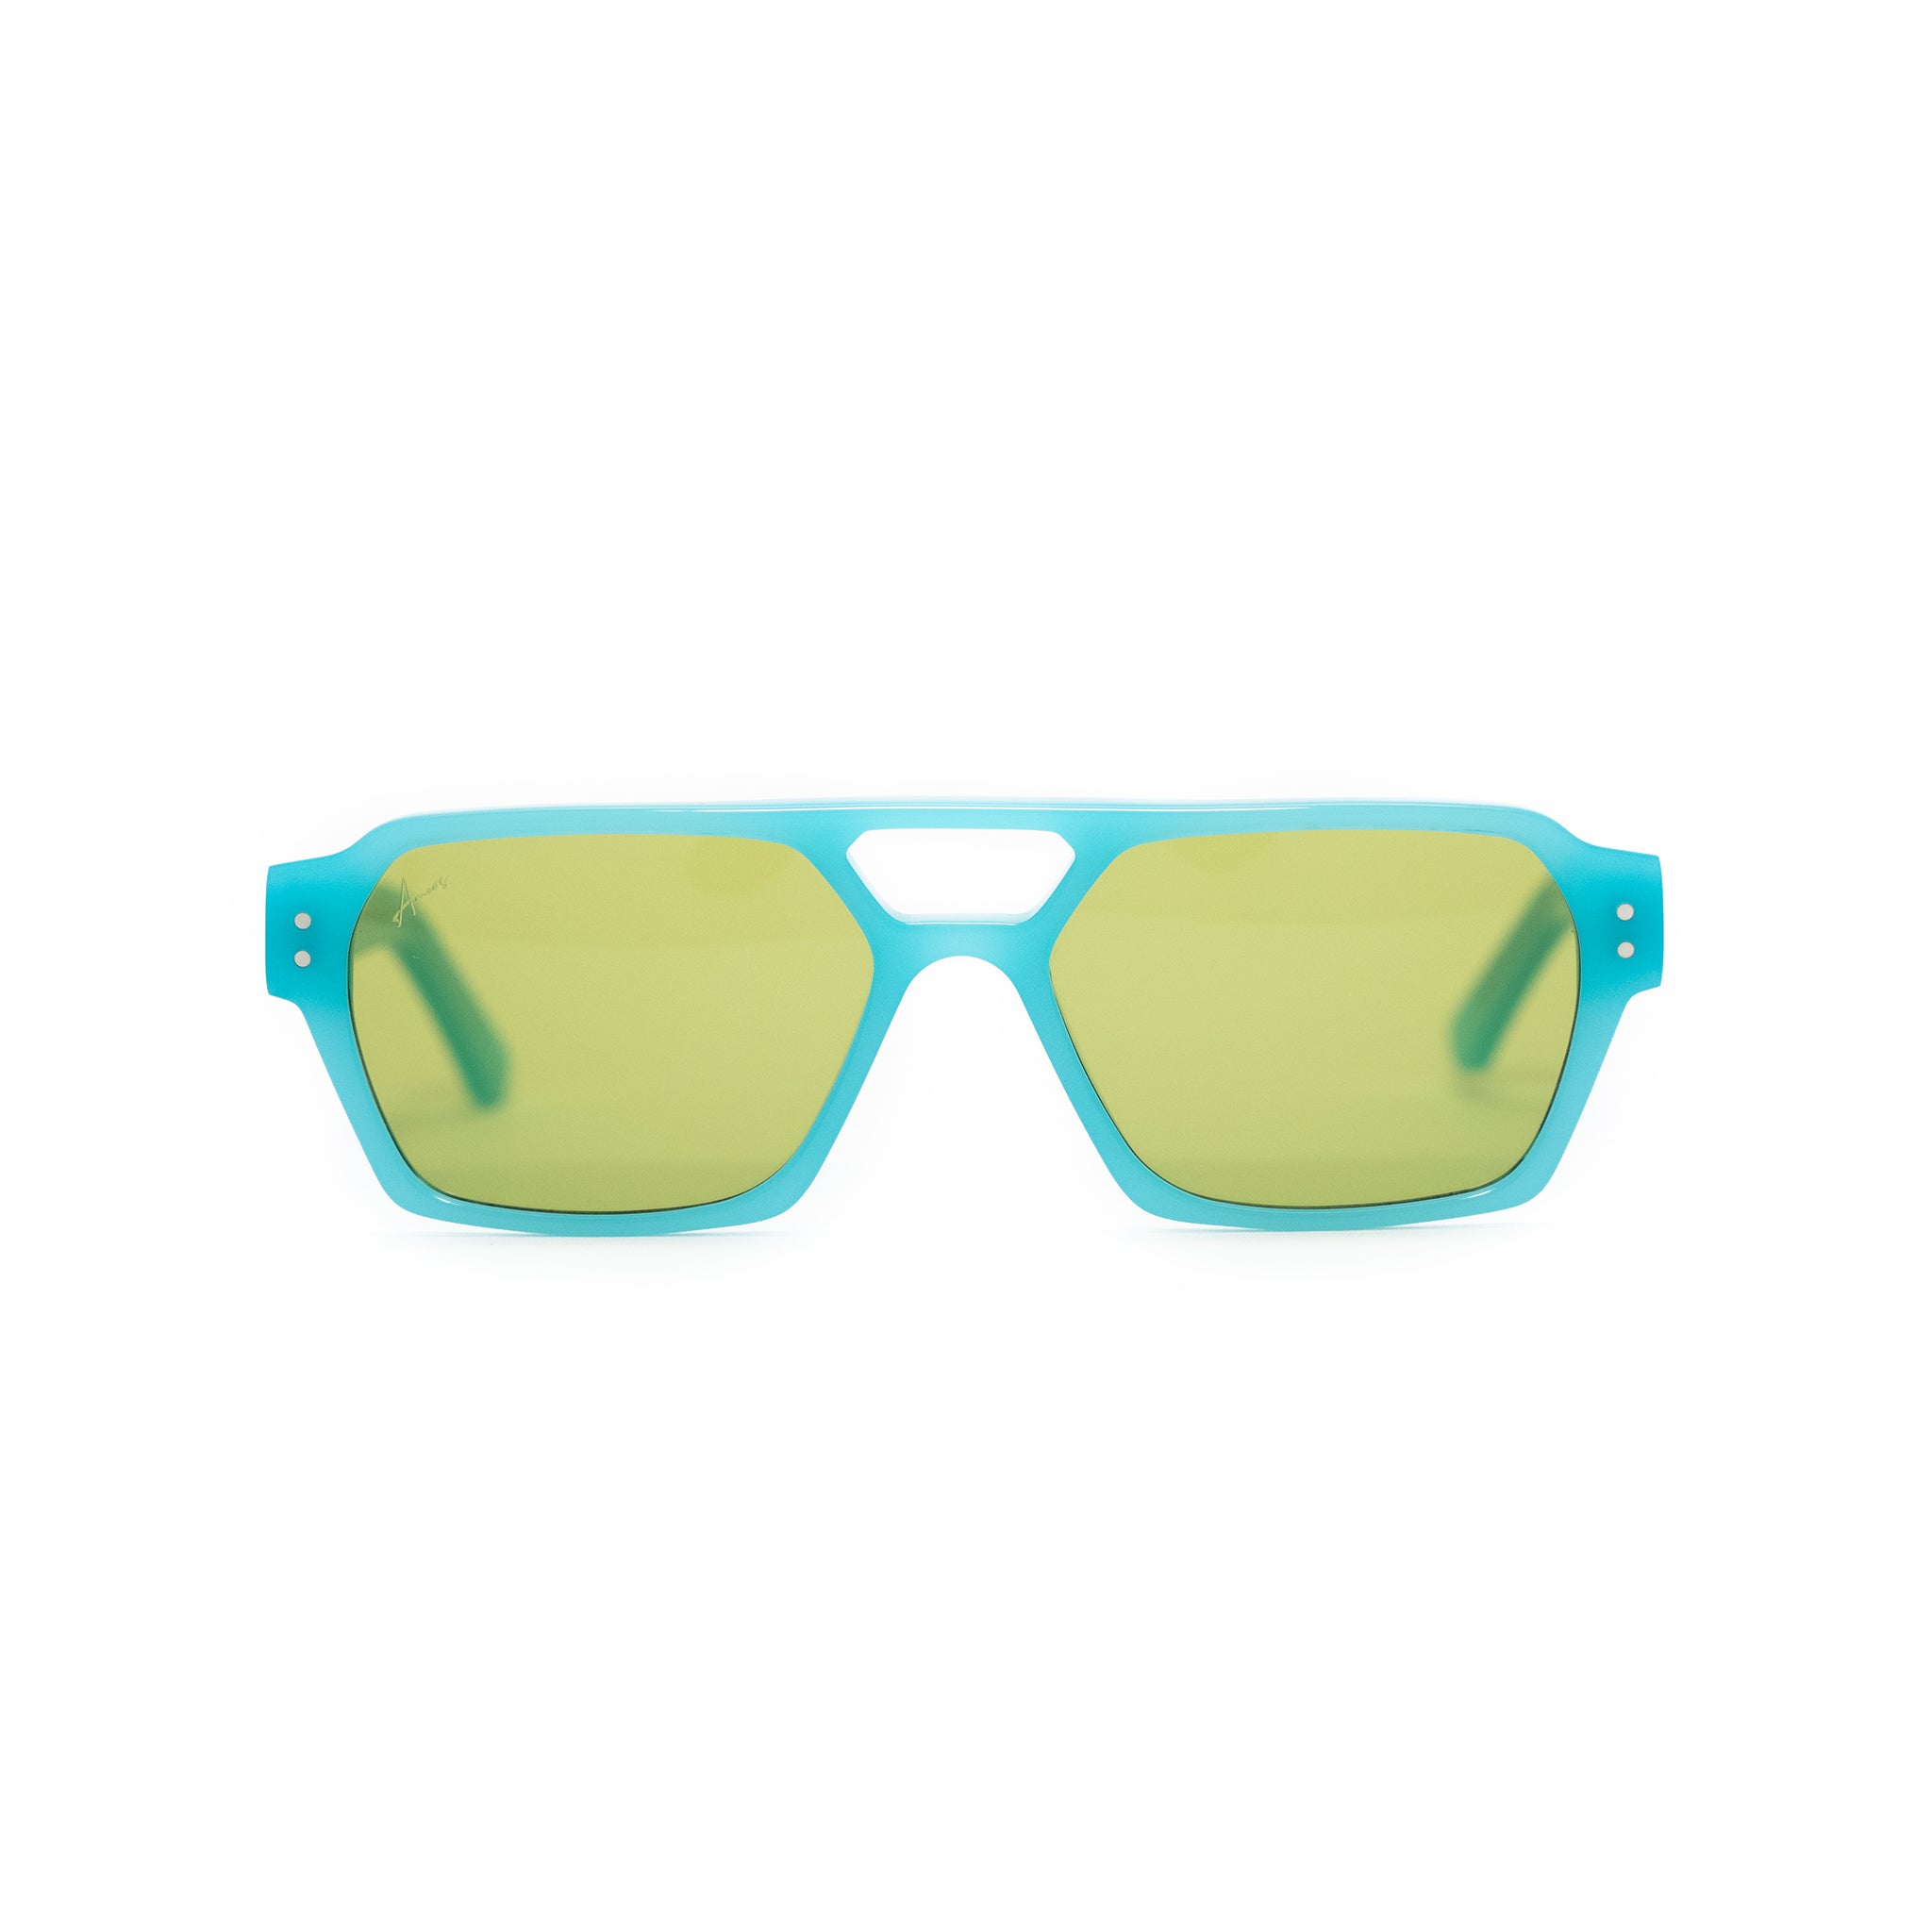 Ameos Identity collection Ego model. Opal blue frames with light green lenses. Front view. Genderless, gender neutral eyewear